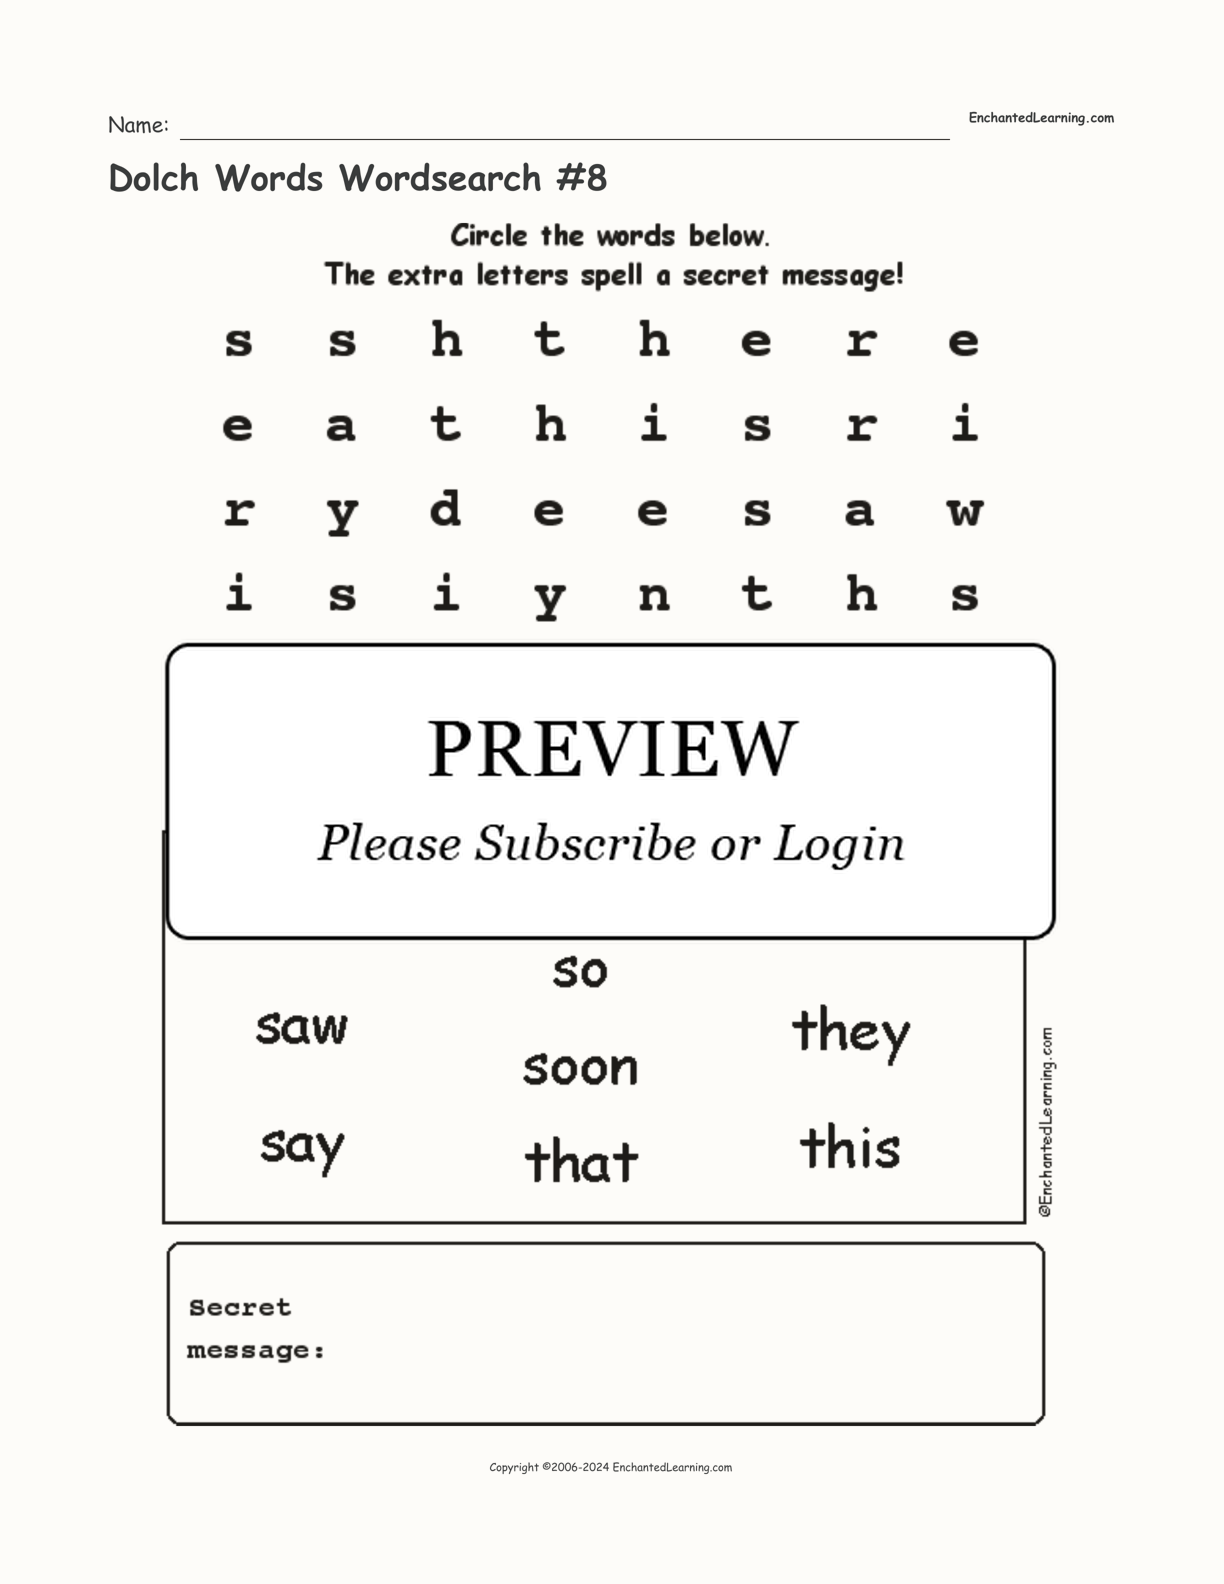 Dolch Words Wordsearch #8 interactive worksheet page 1